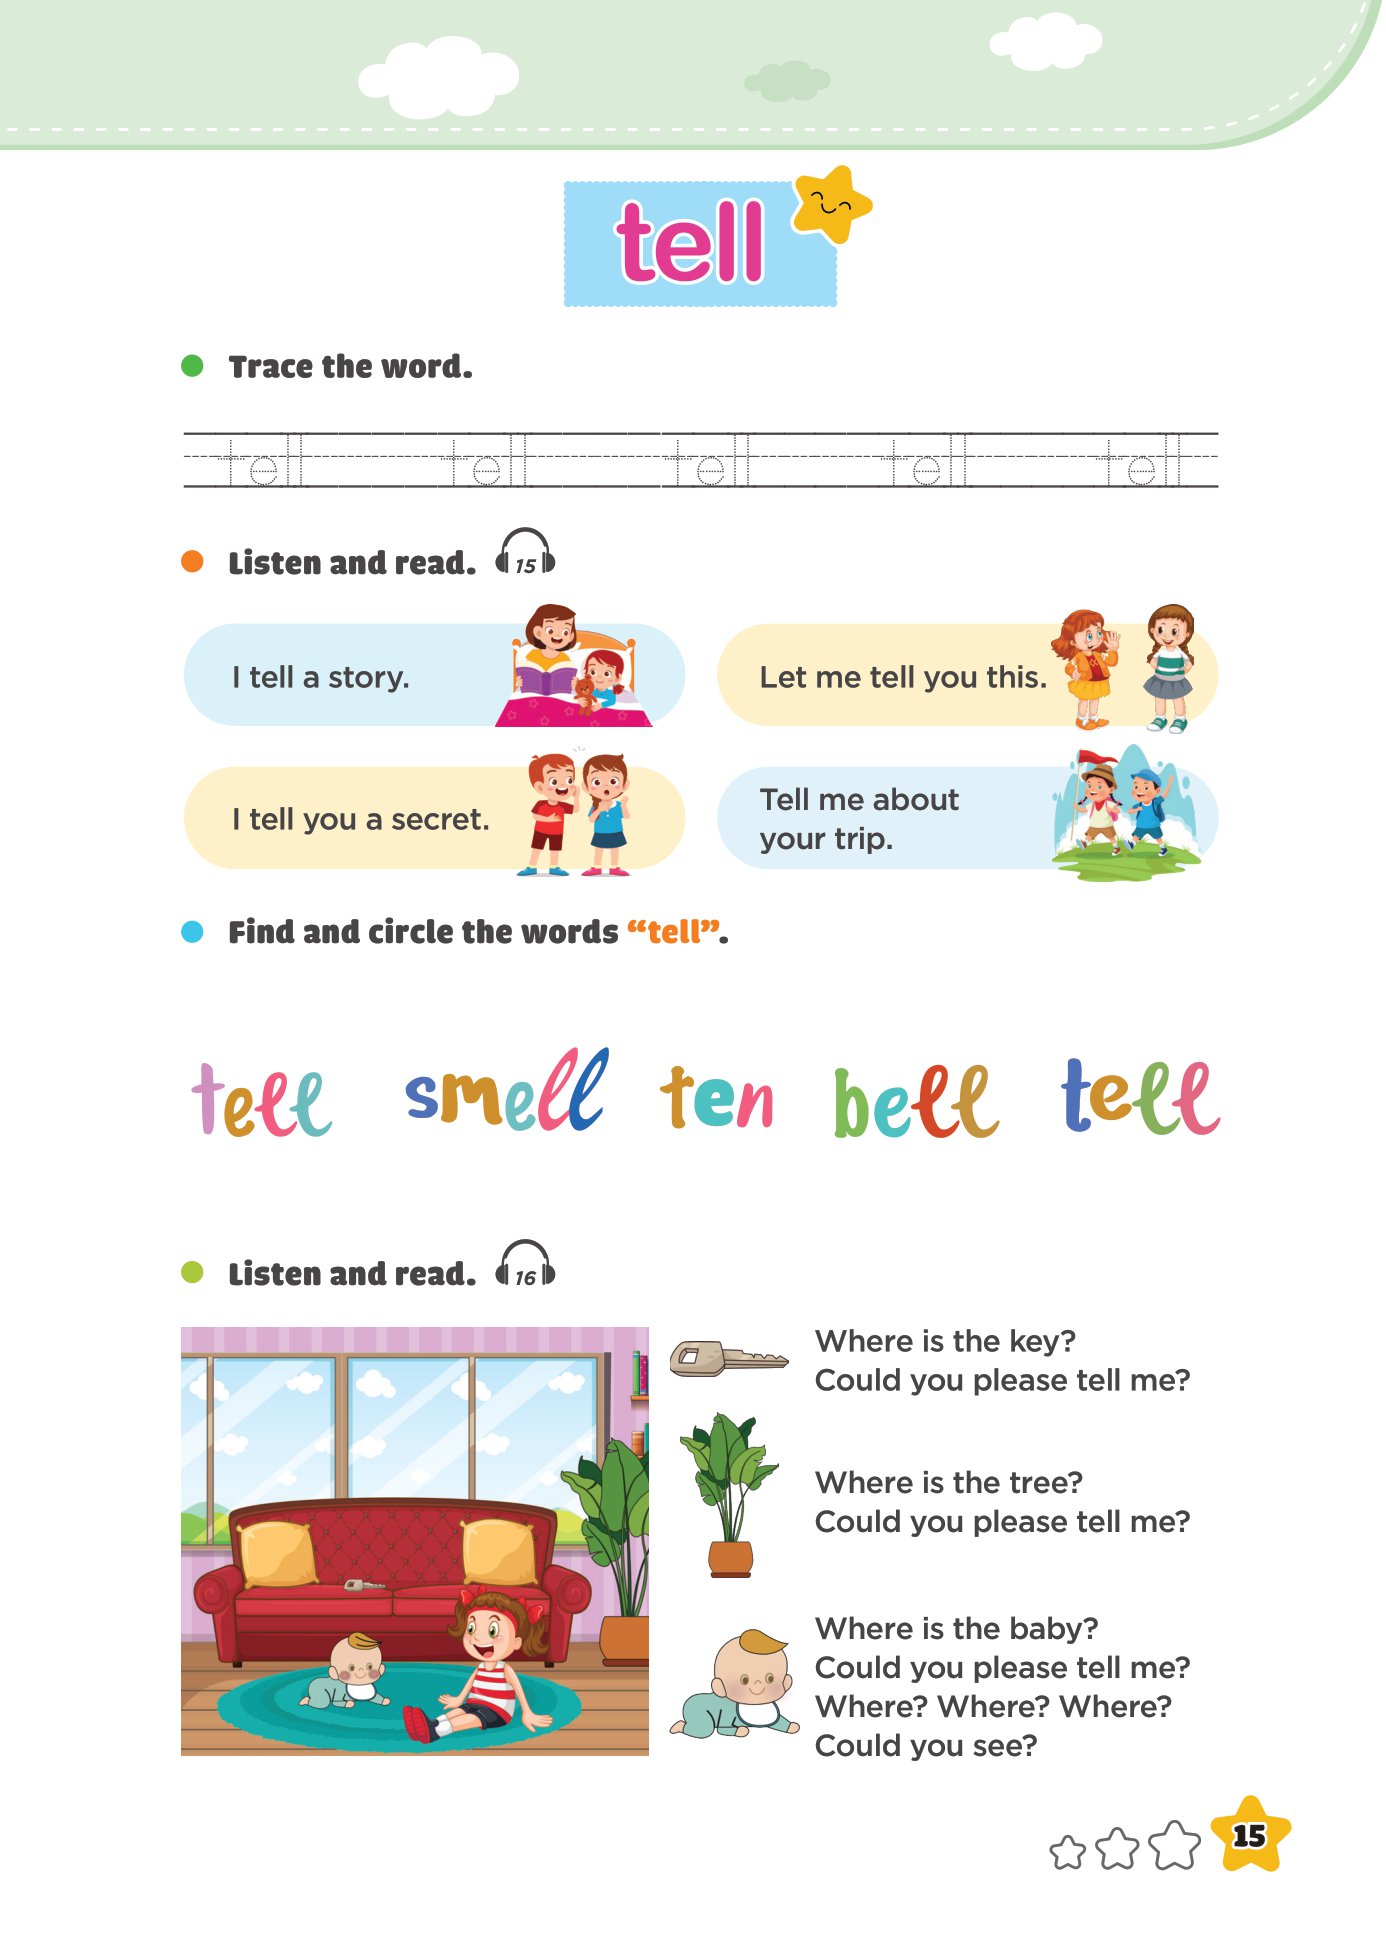 300 First Sight Words For Kids - 2 PDF